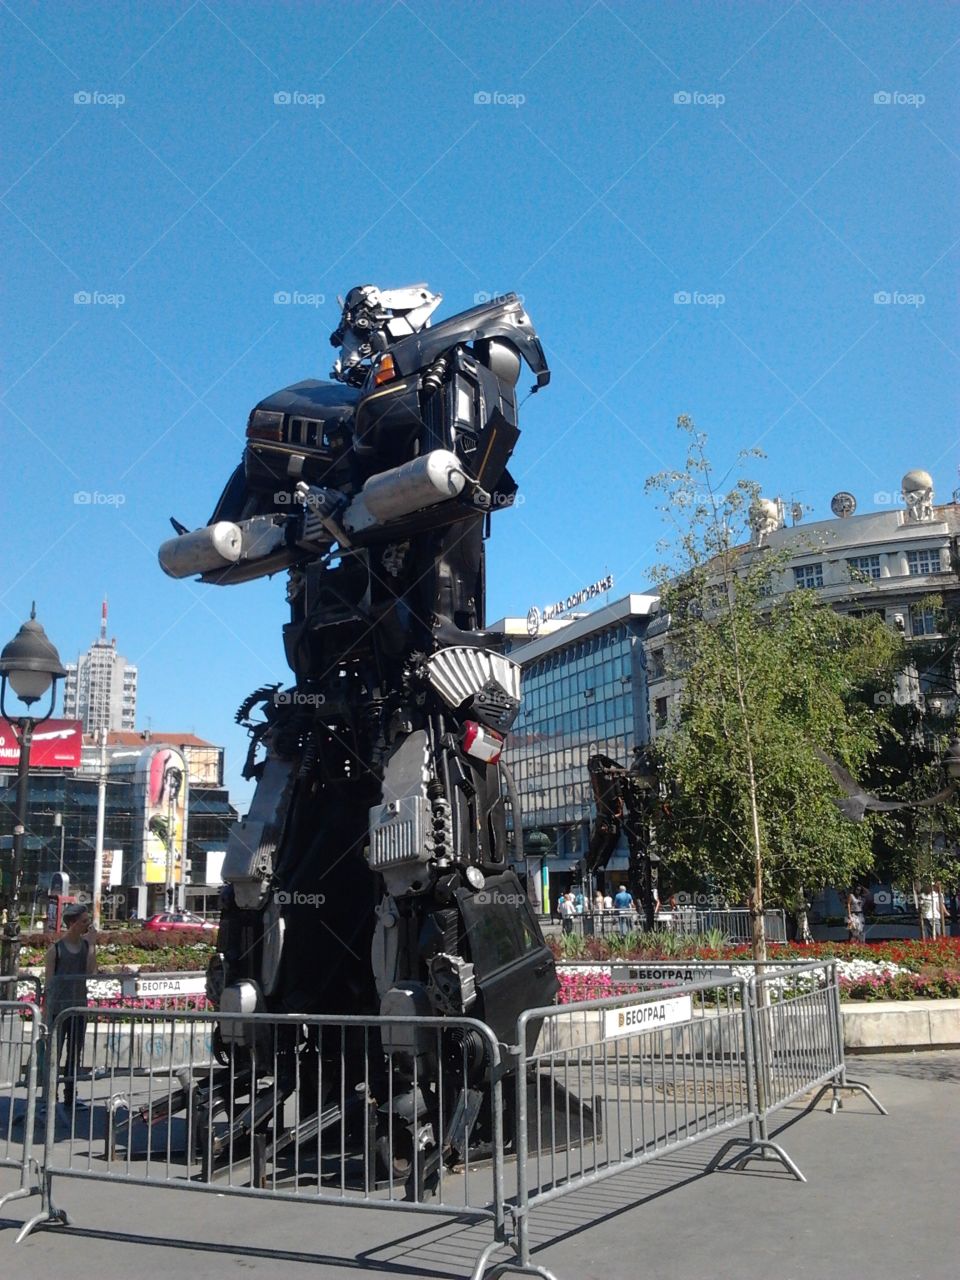 A giant transformer made out of recycled materials